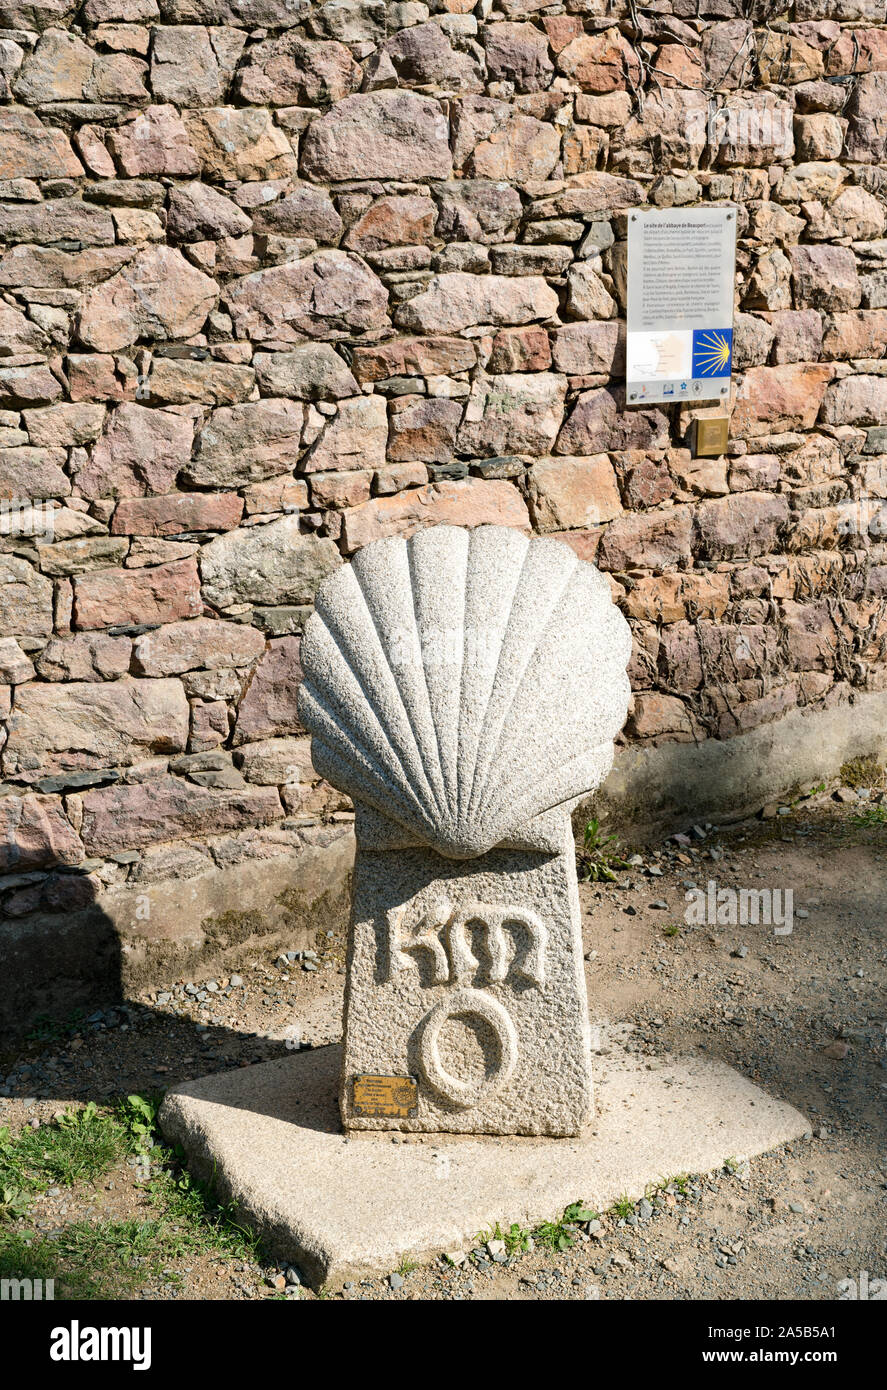 Paimpol, Cotes-d'Armor / France - 20 August 2019: the start of the Camino Breton pilgrimage at Beauport Abbey in Brittany with shell symbol Stock Photo